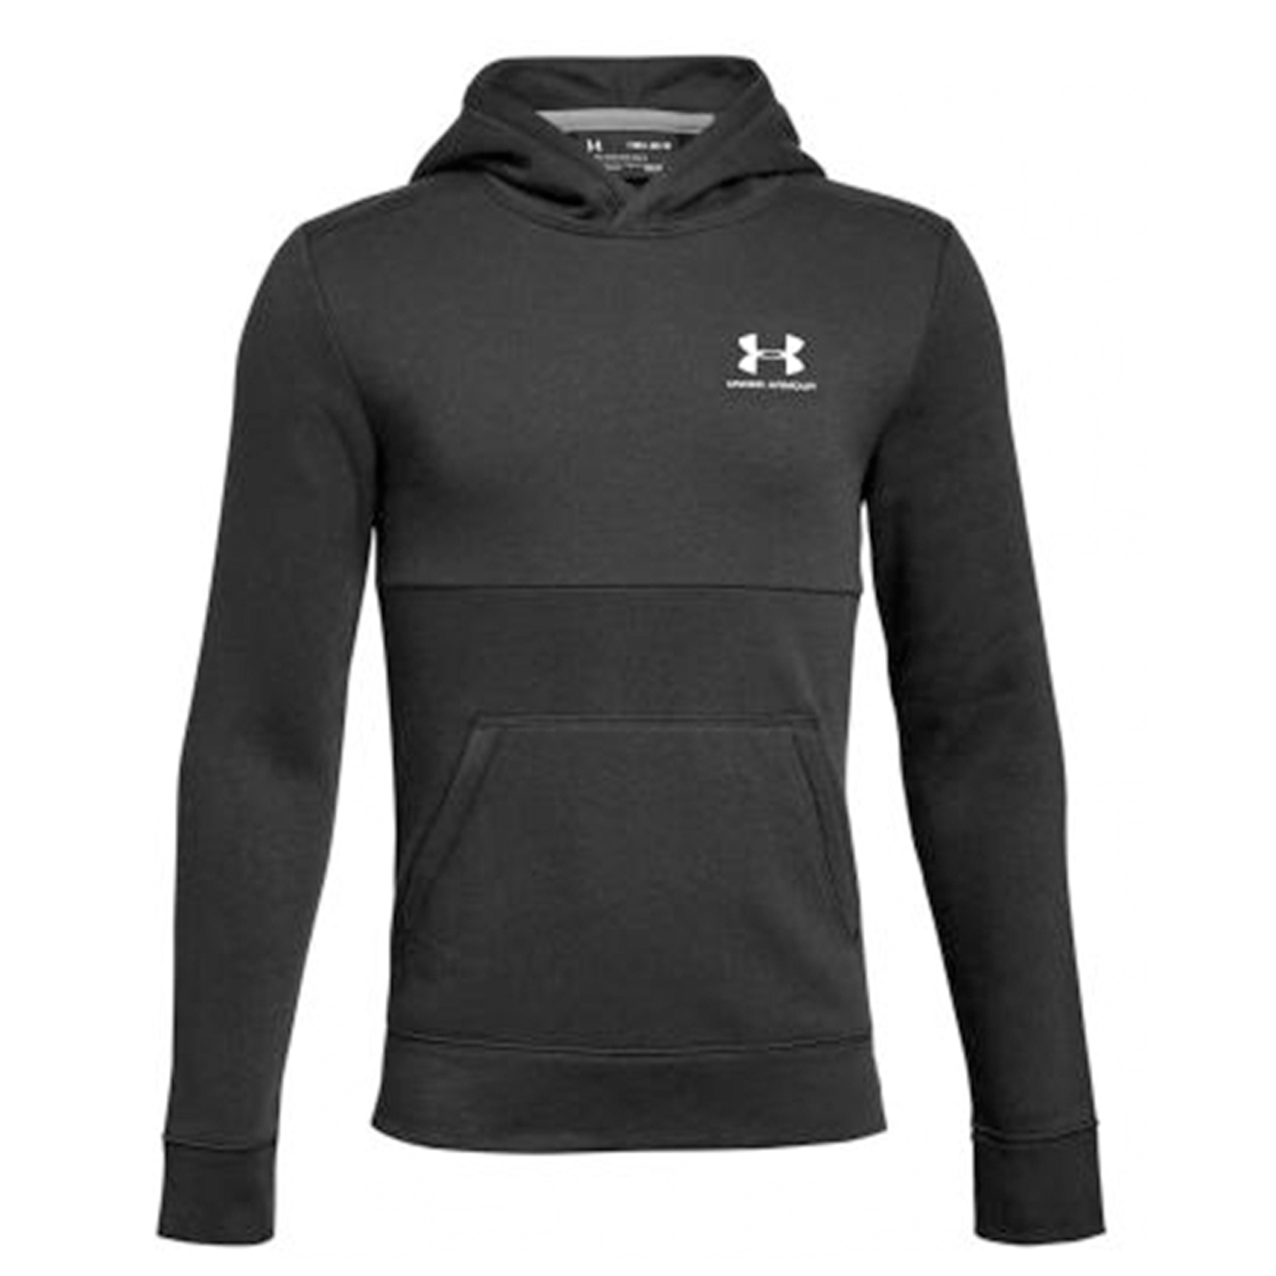 UNDER ARMOUR YOUTH OH HOODIE BLACK 1320134-002